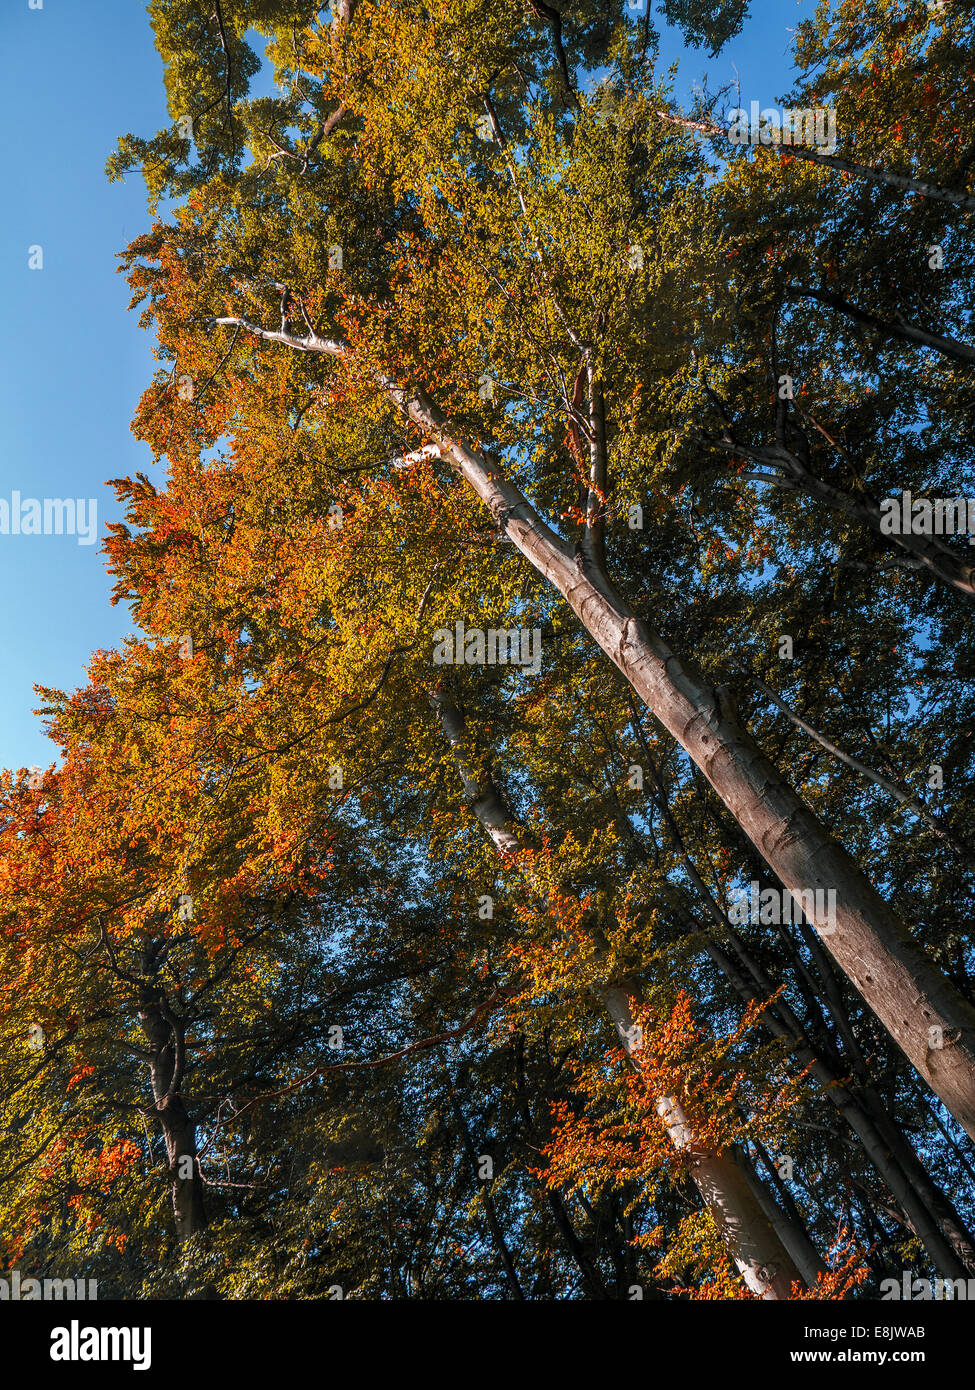 Tree crowns in fall colors - looking upwards Stock Photo